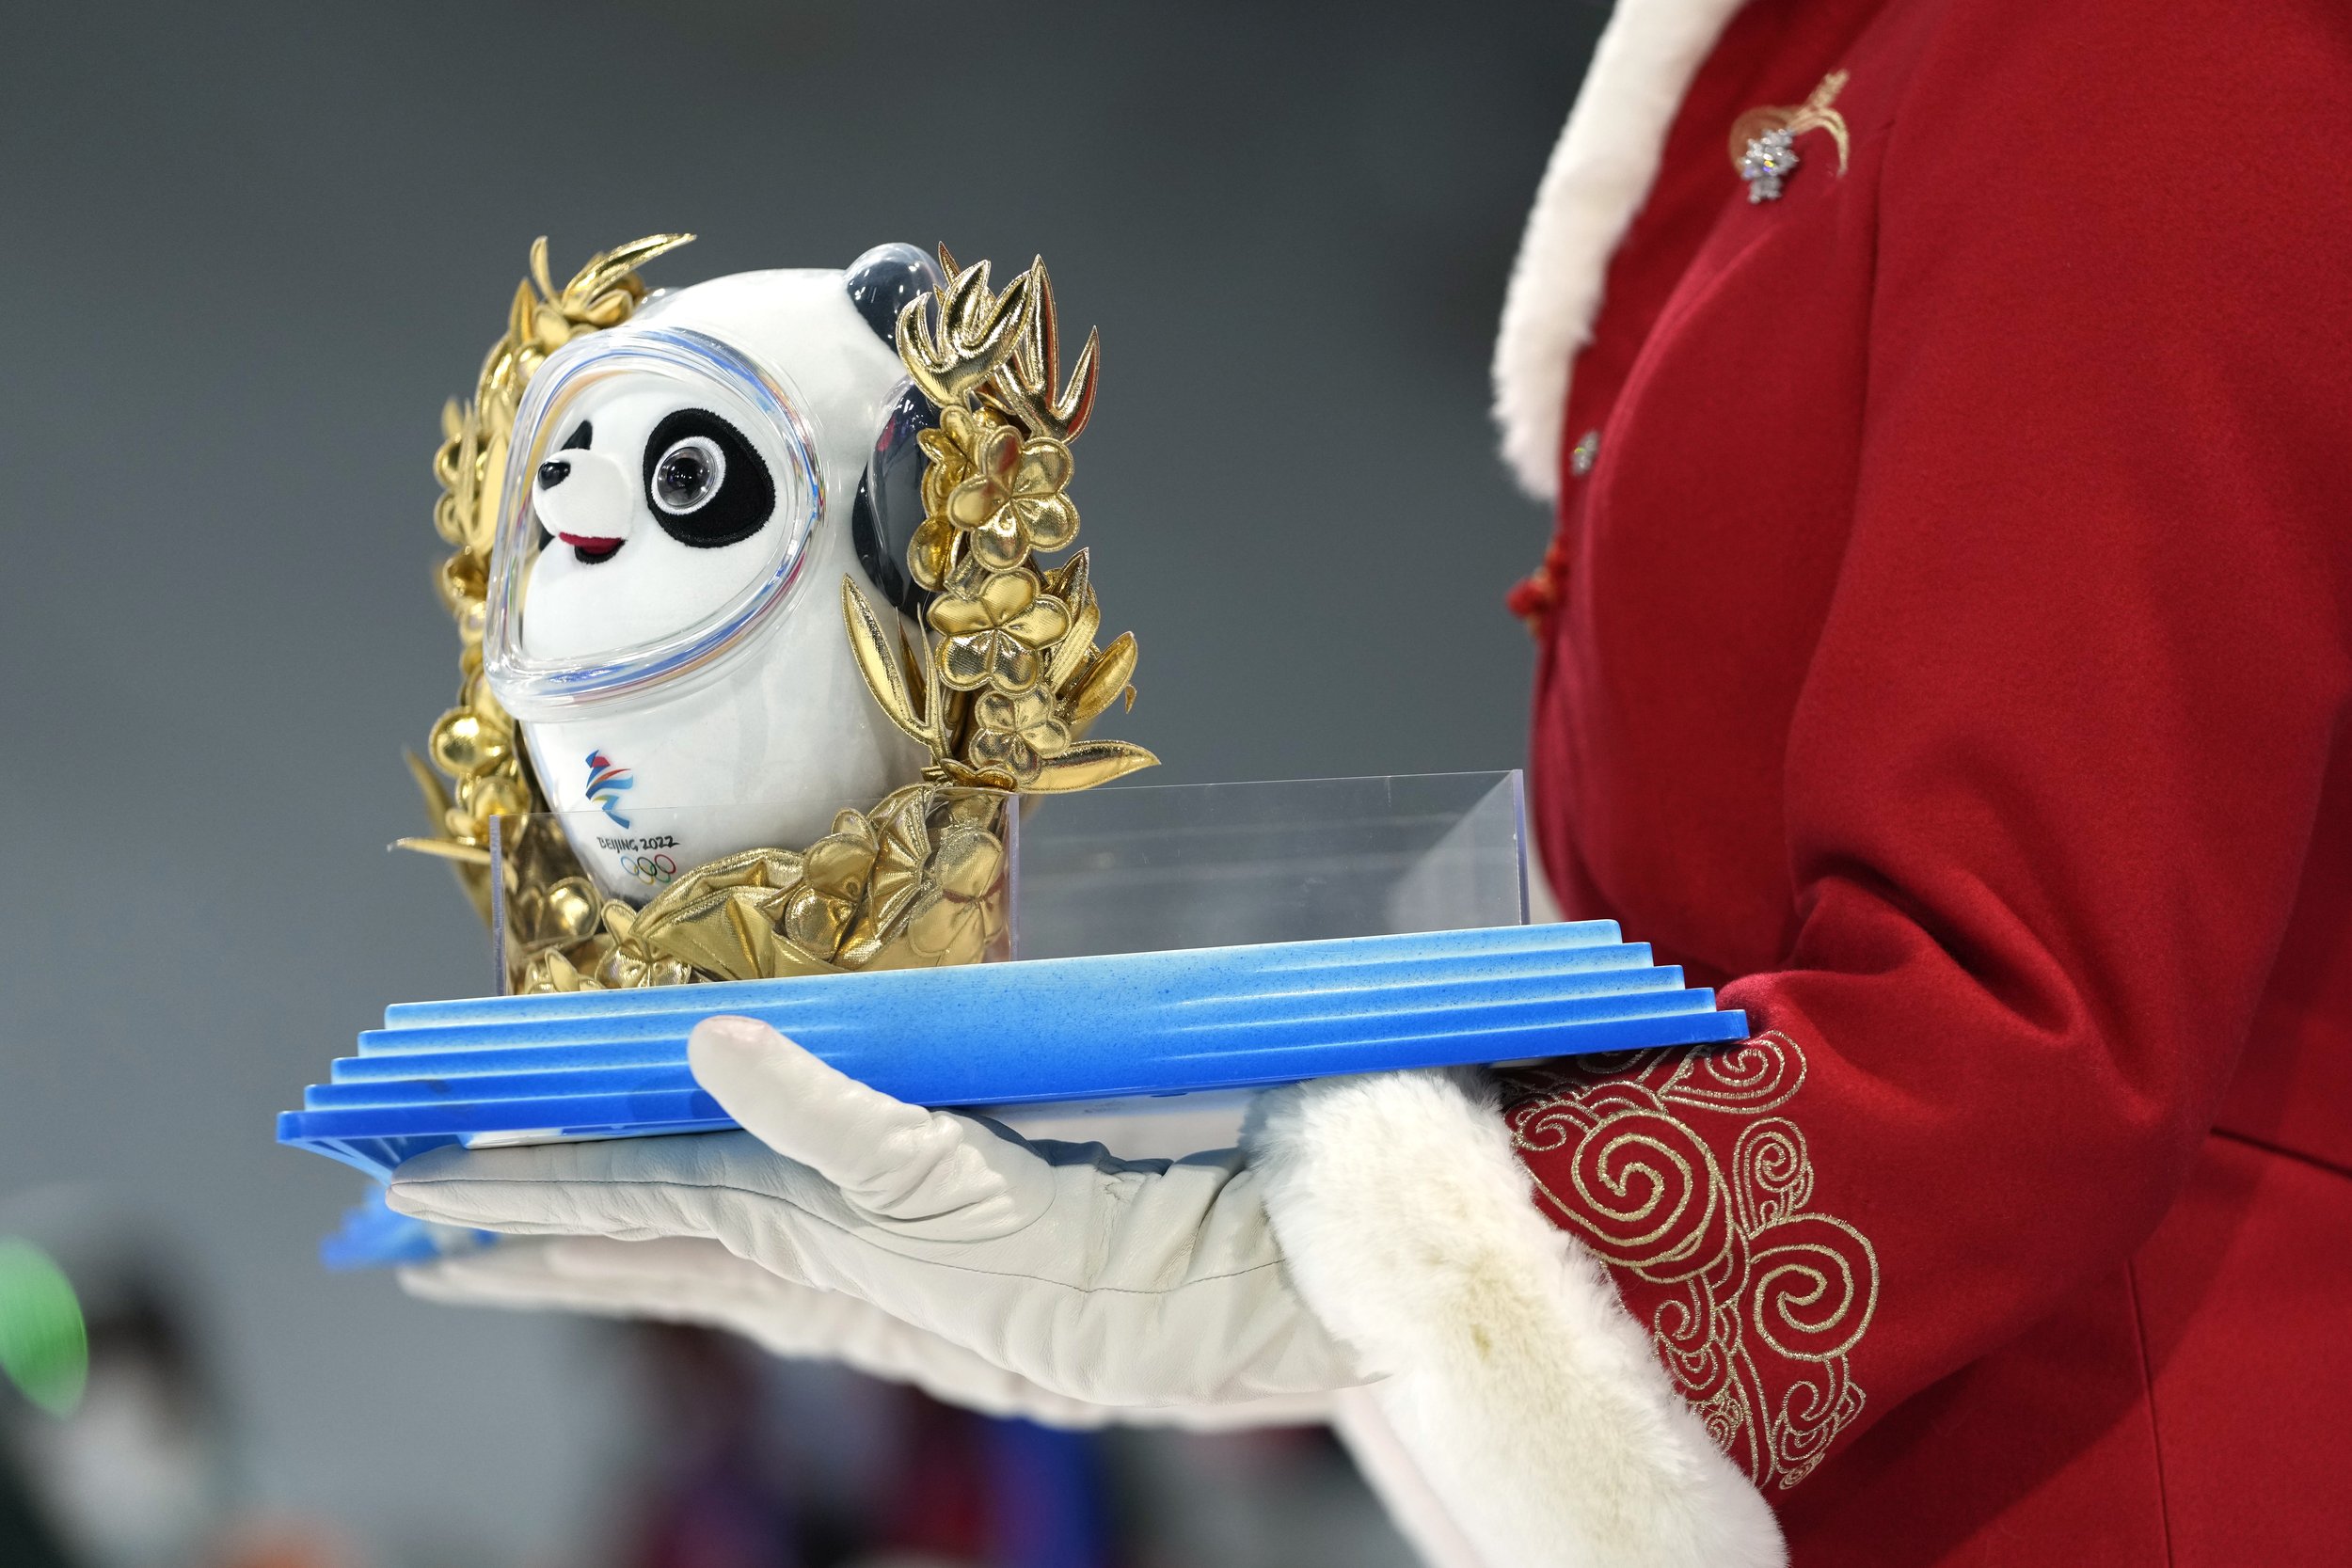  A mascot that is presented to the medal winners is seen during the award ceremony for the women's moguls at Genting Snow Park at the 2022 Winter Olympics, Sunday, Feb. 6, 2022, in Zhangjiakou, China. (AP Photo/Francisco Seco) 